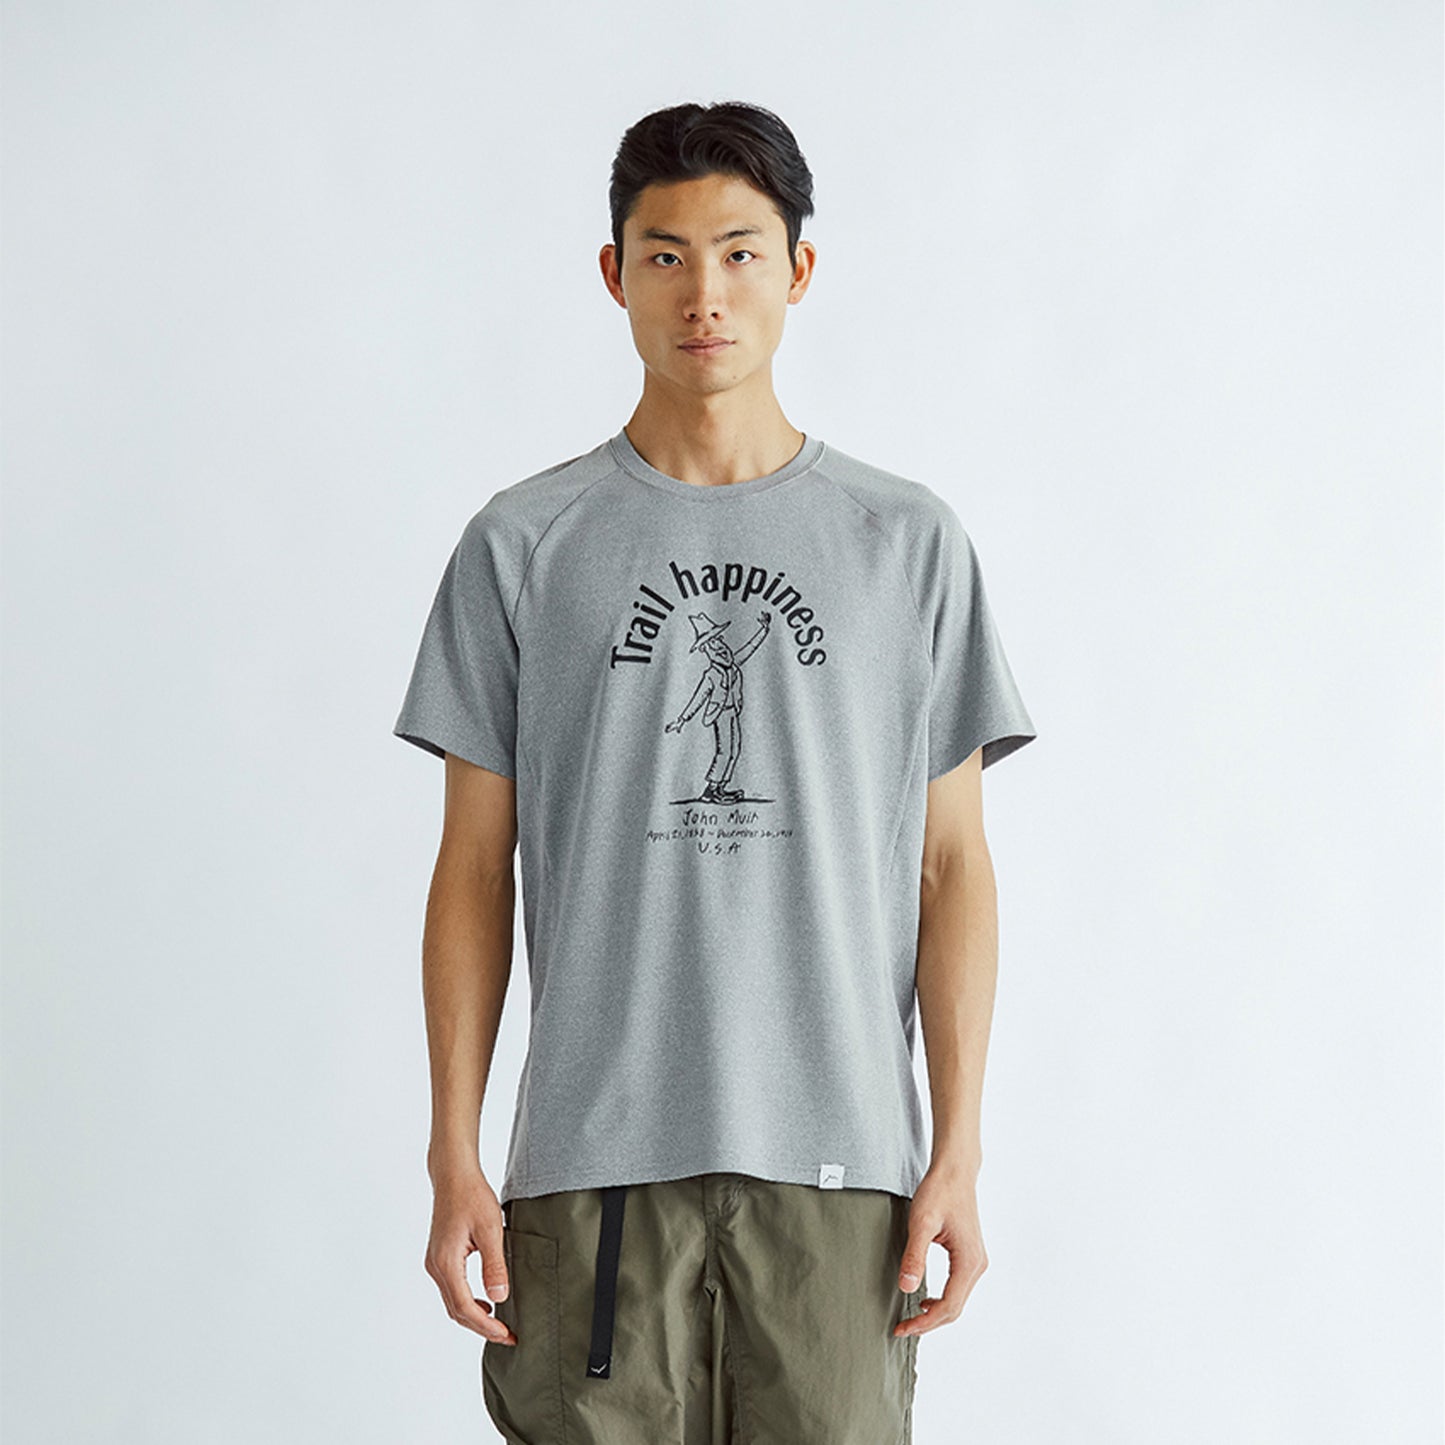 CAYL Trail Happiness - Short Sleeve Tee